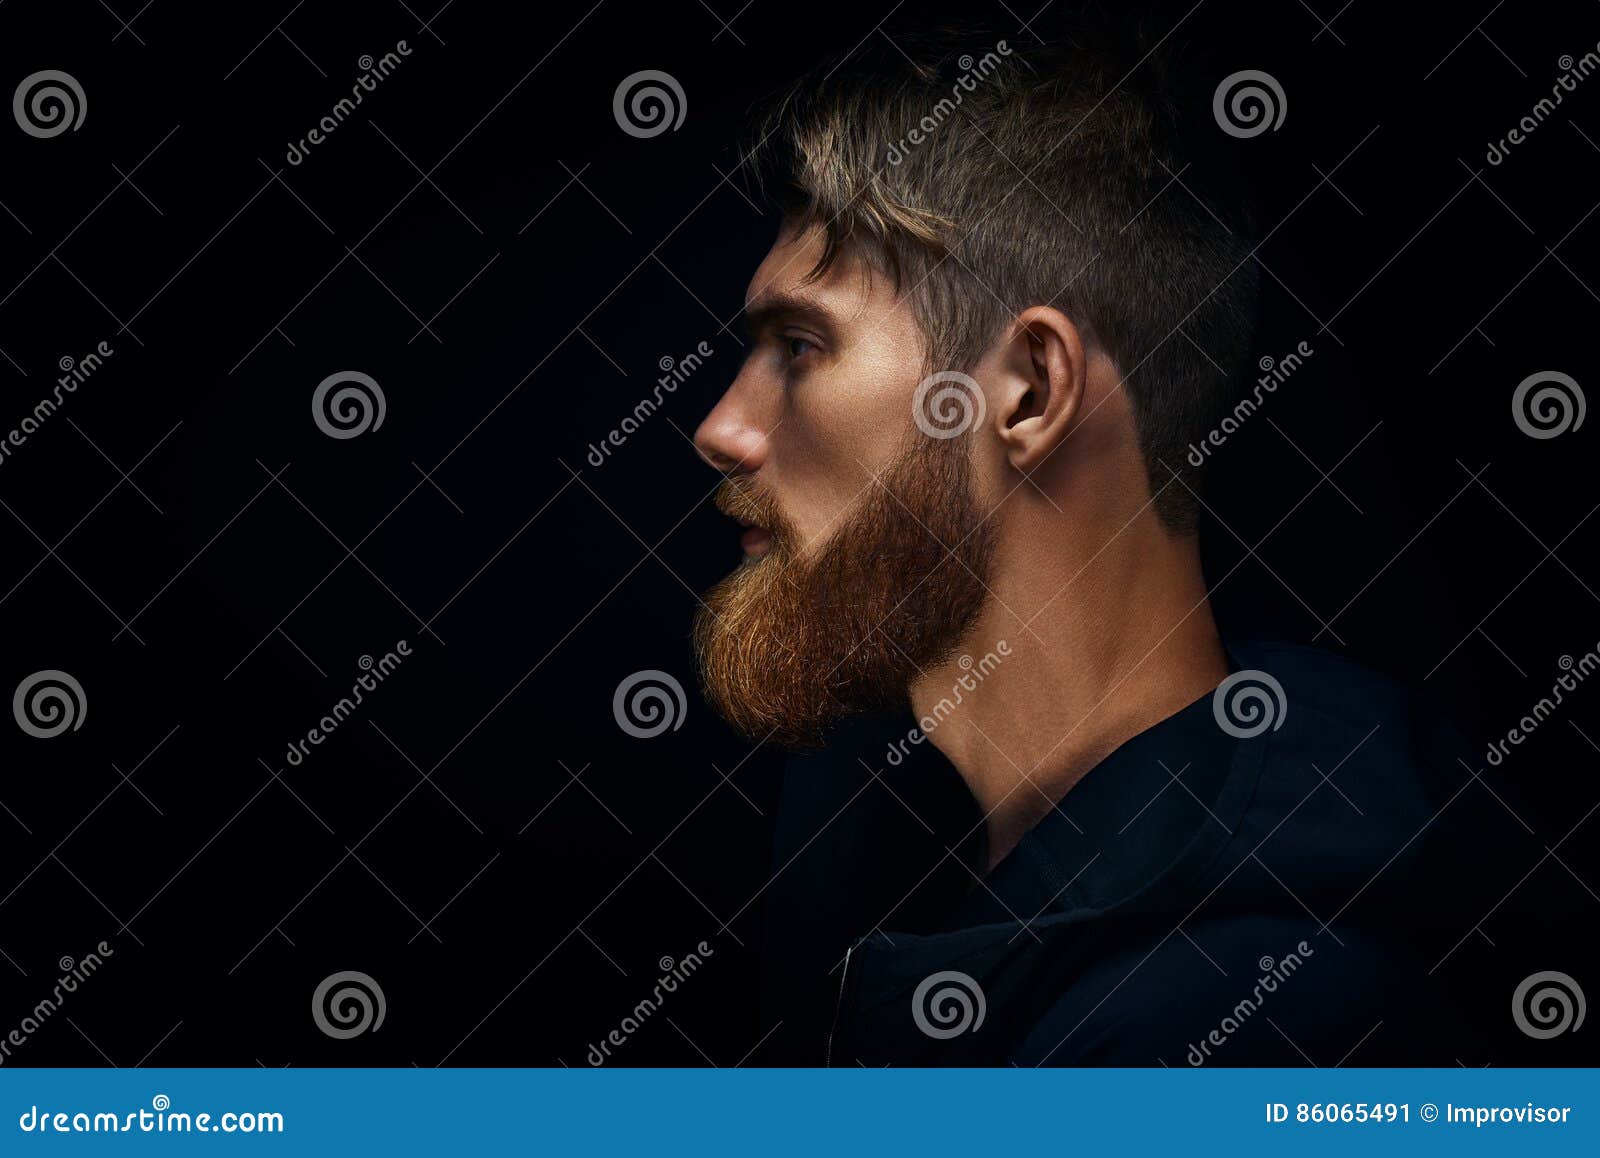 close-up image of serious brutal bearded man on dark background